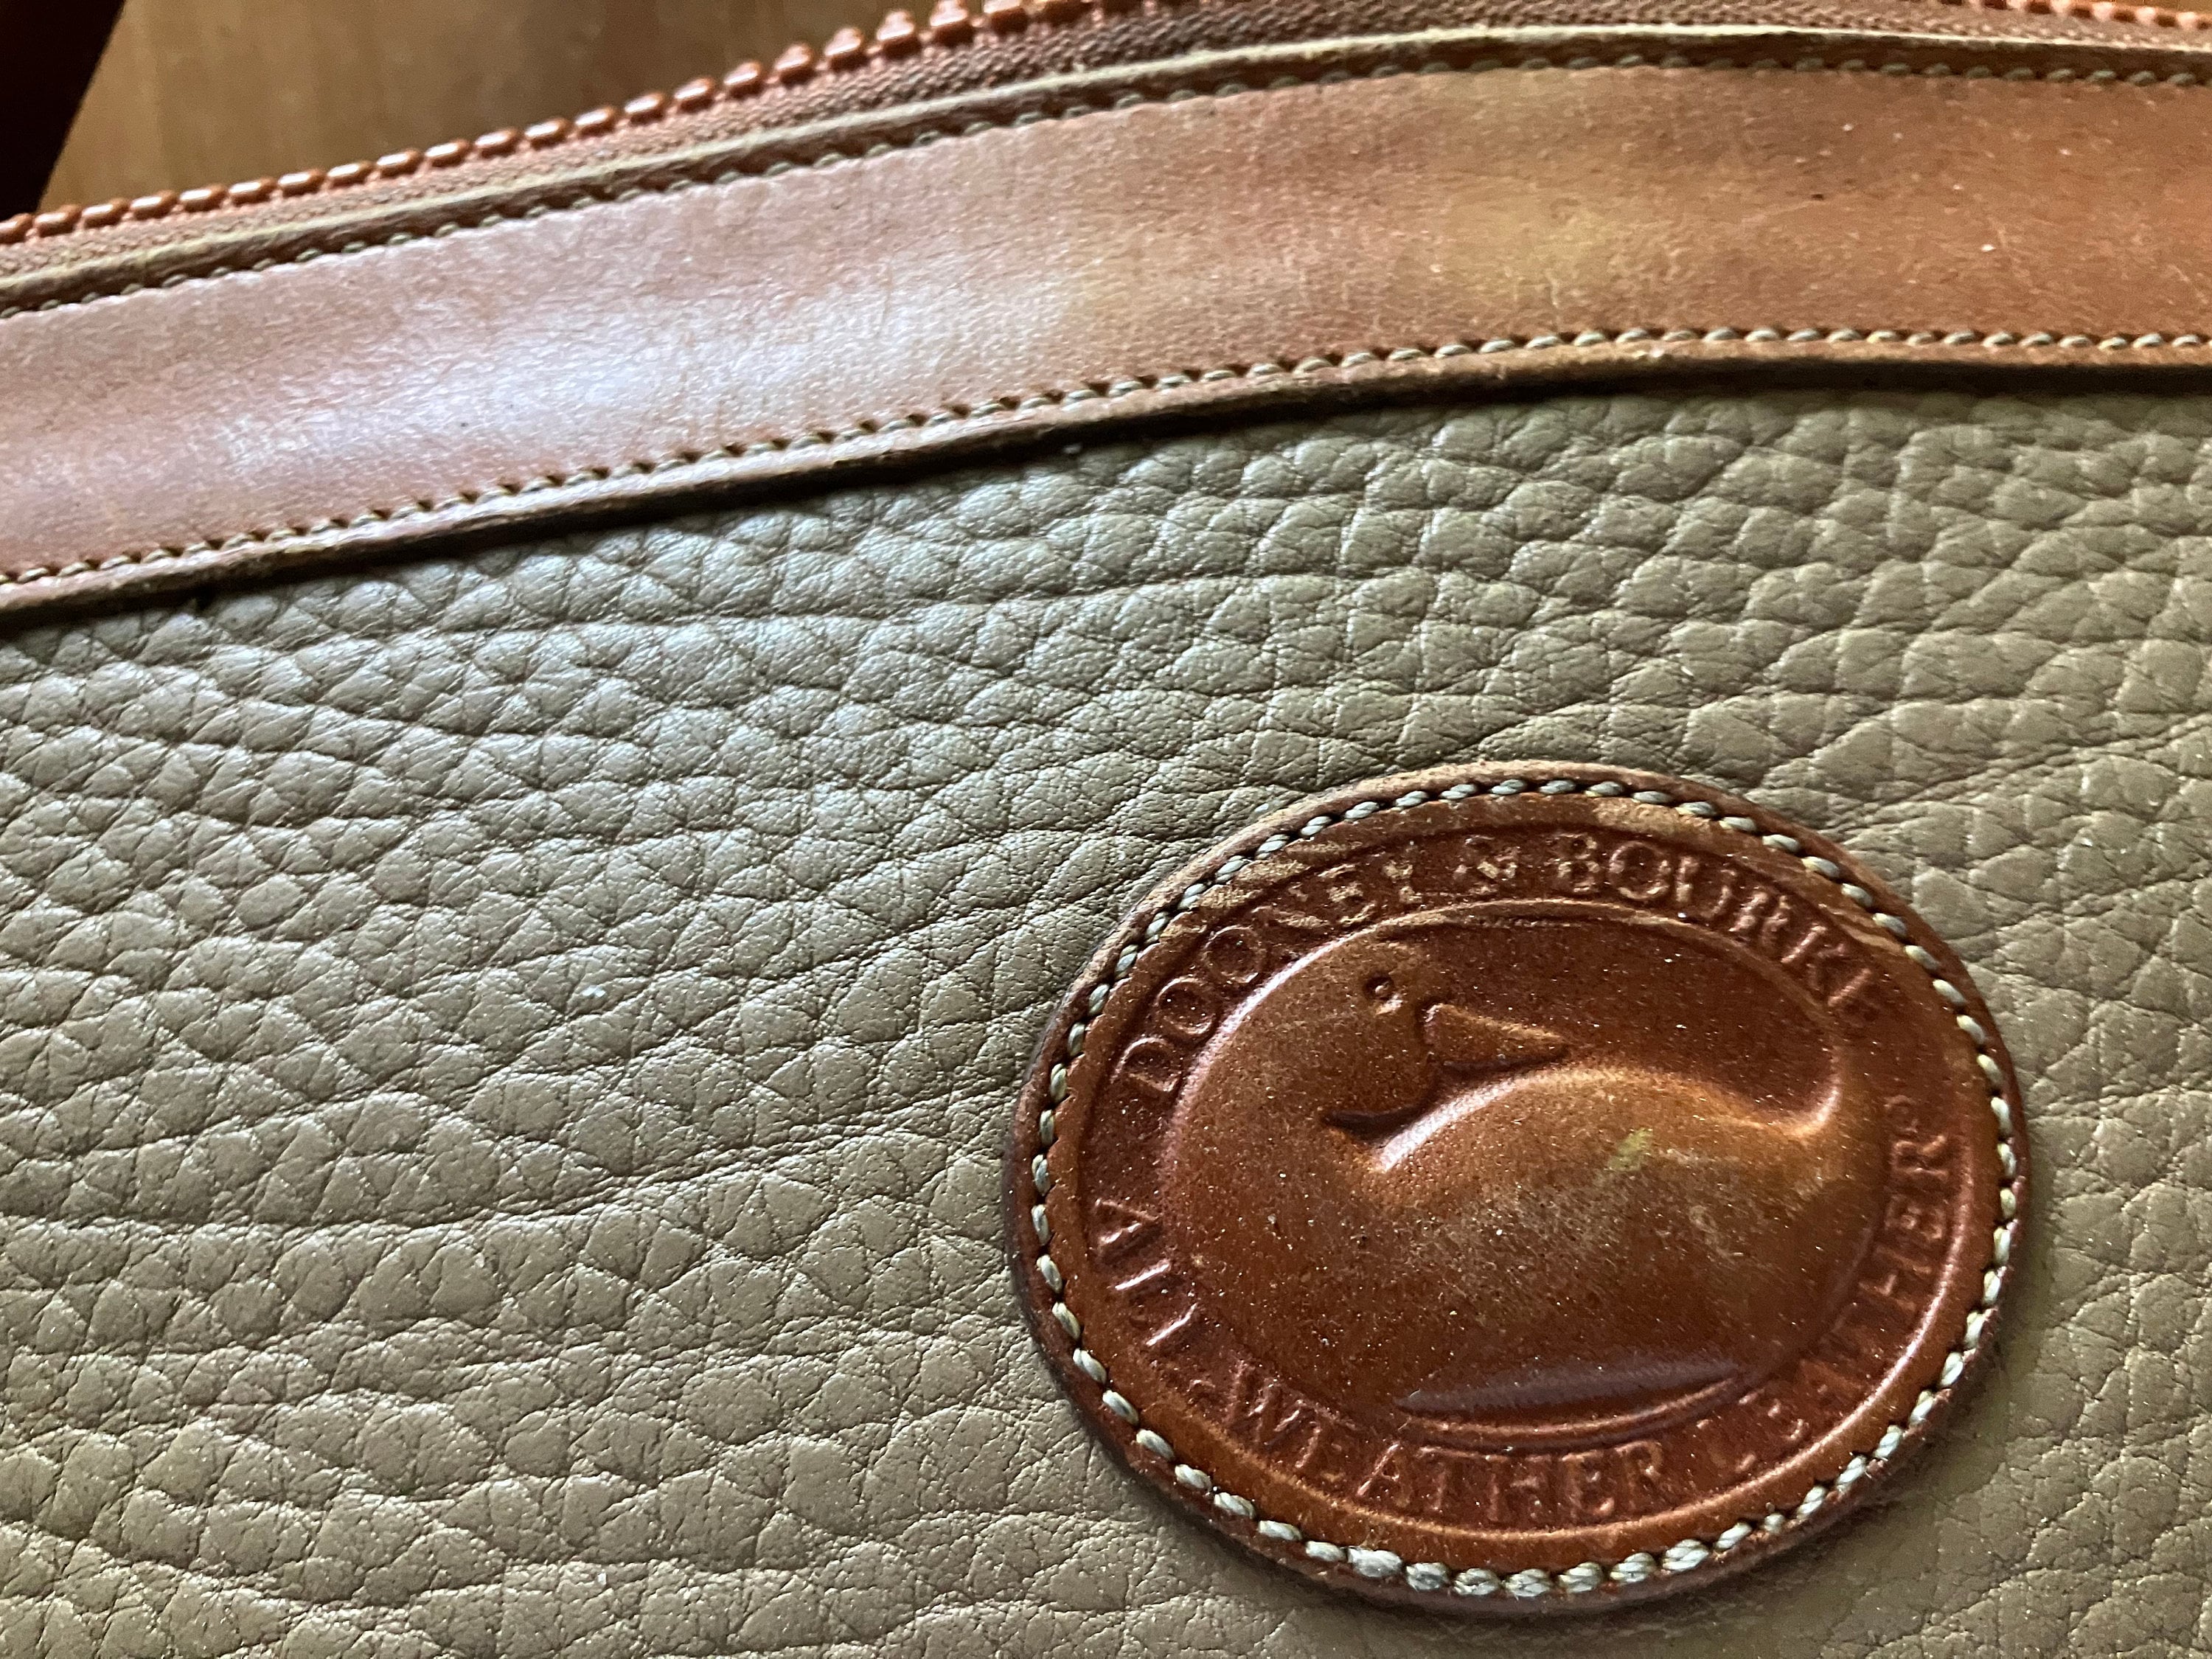 Dooney and Bourke classic British tan and beige medium size crossbody  shoulder bag Made in USA waterproof leather vintage purse top zipper